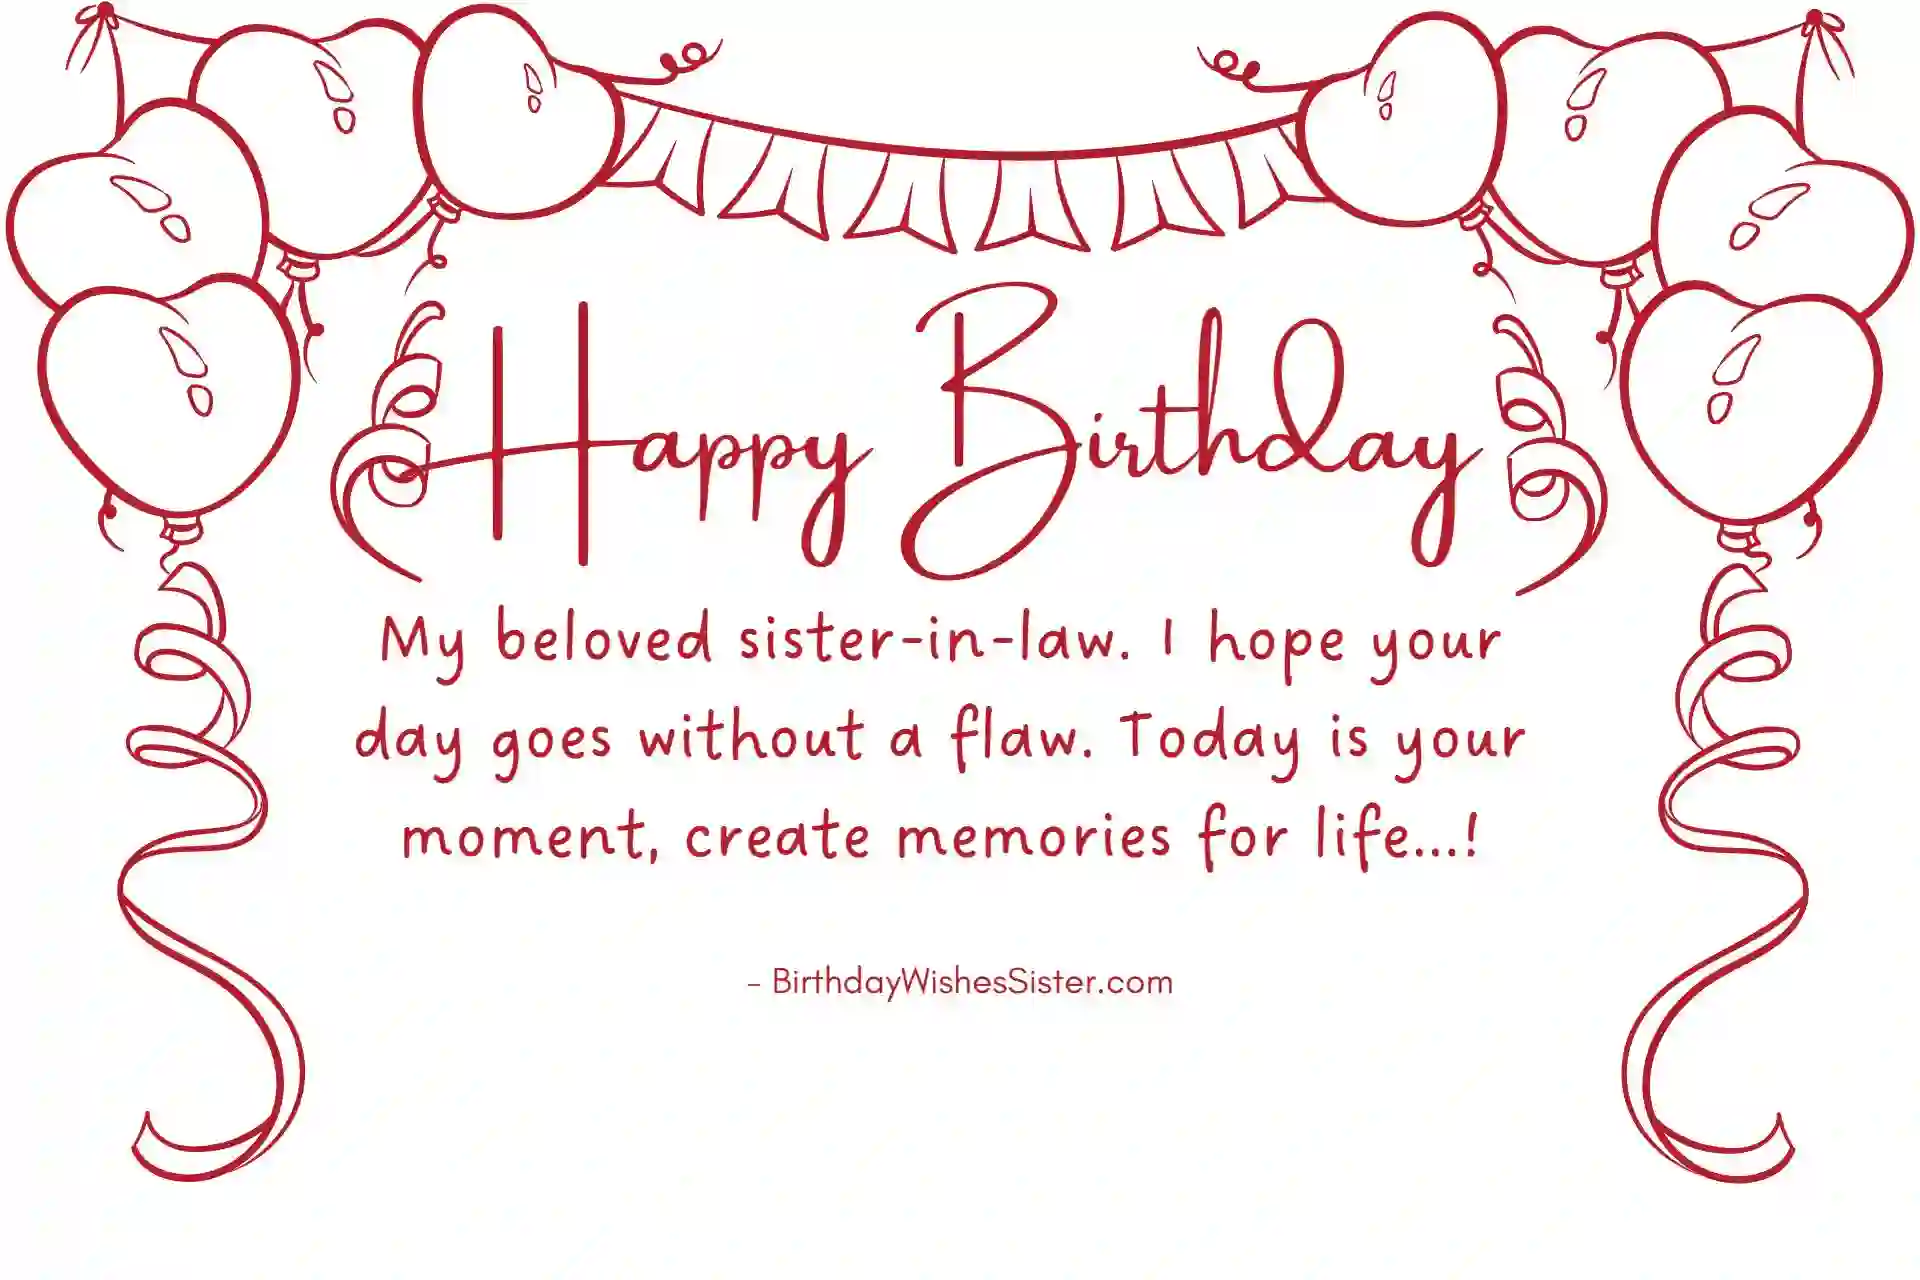 Best Birthday Wishes For Sister In Law